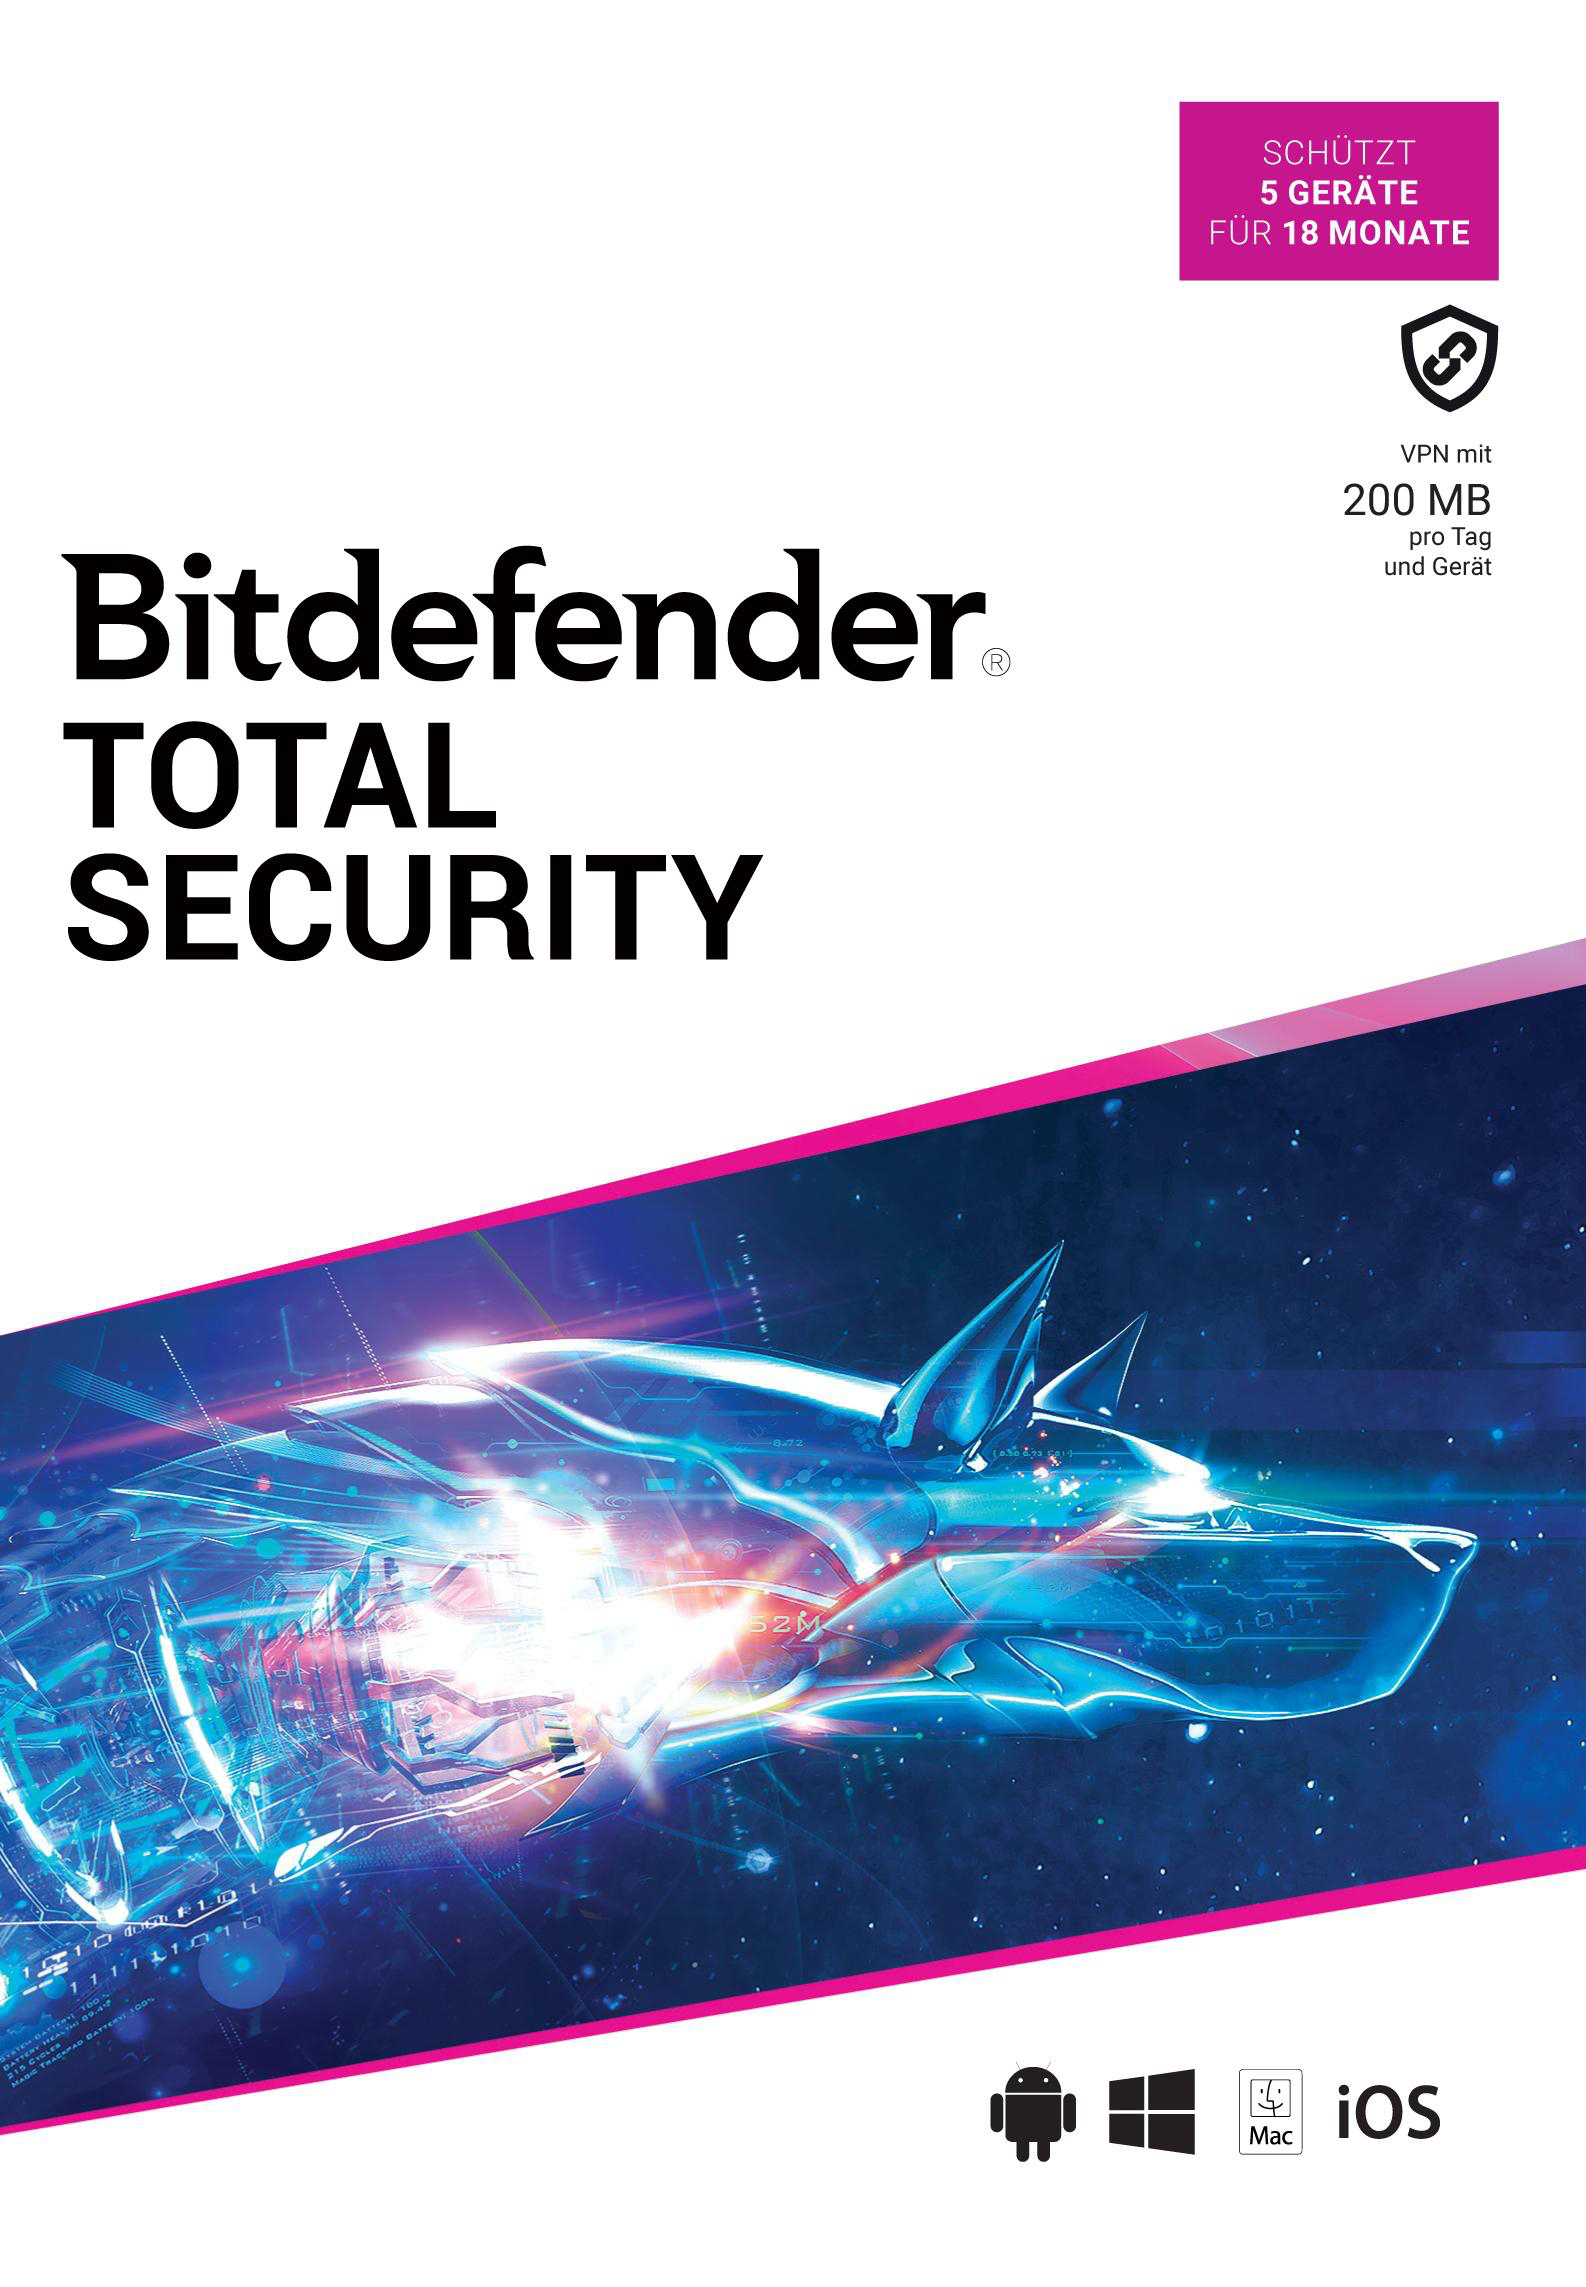 Bitdefender Total Security 5 Geräte / - [PC] a 18 Box) in (Code Monate